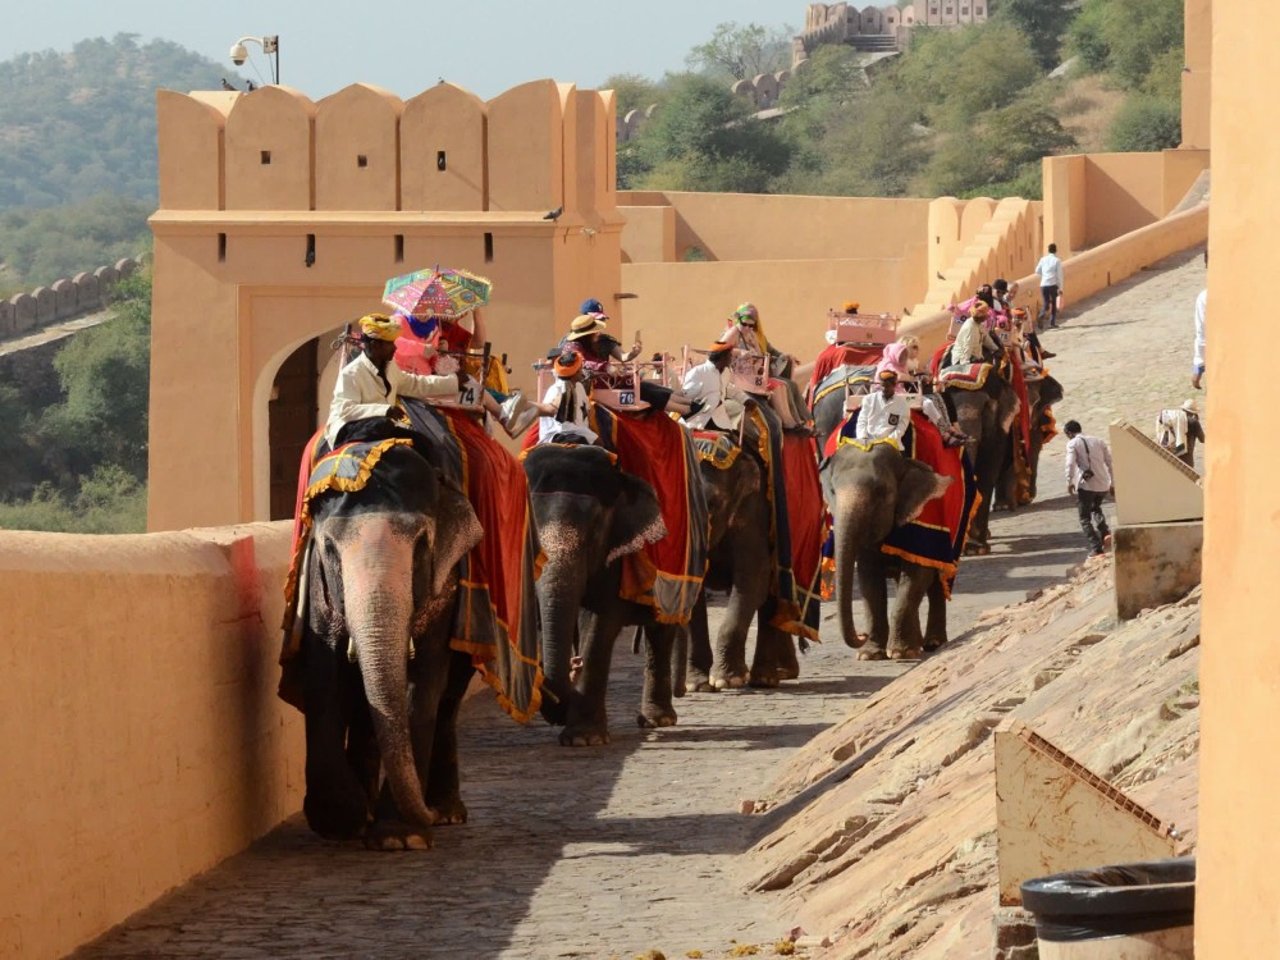 Elephants carrying tourists at Amer Fort, India